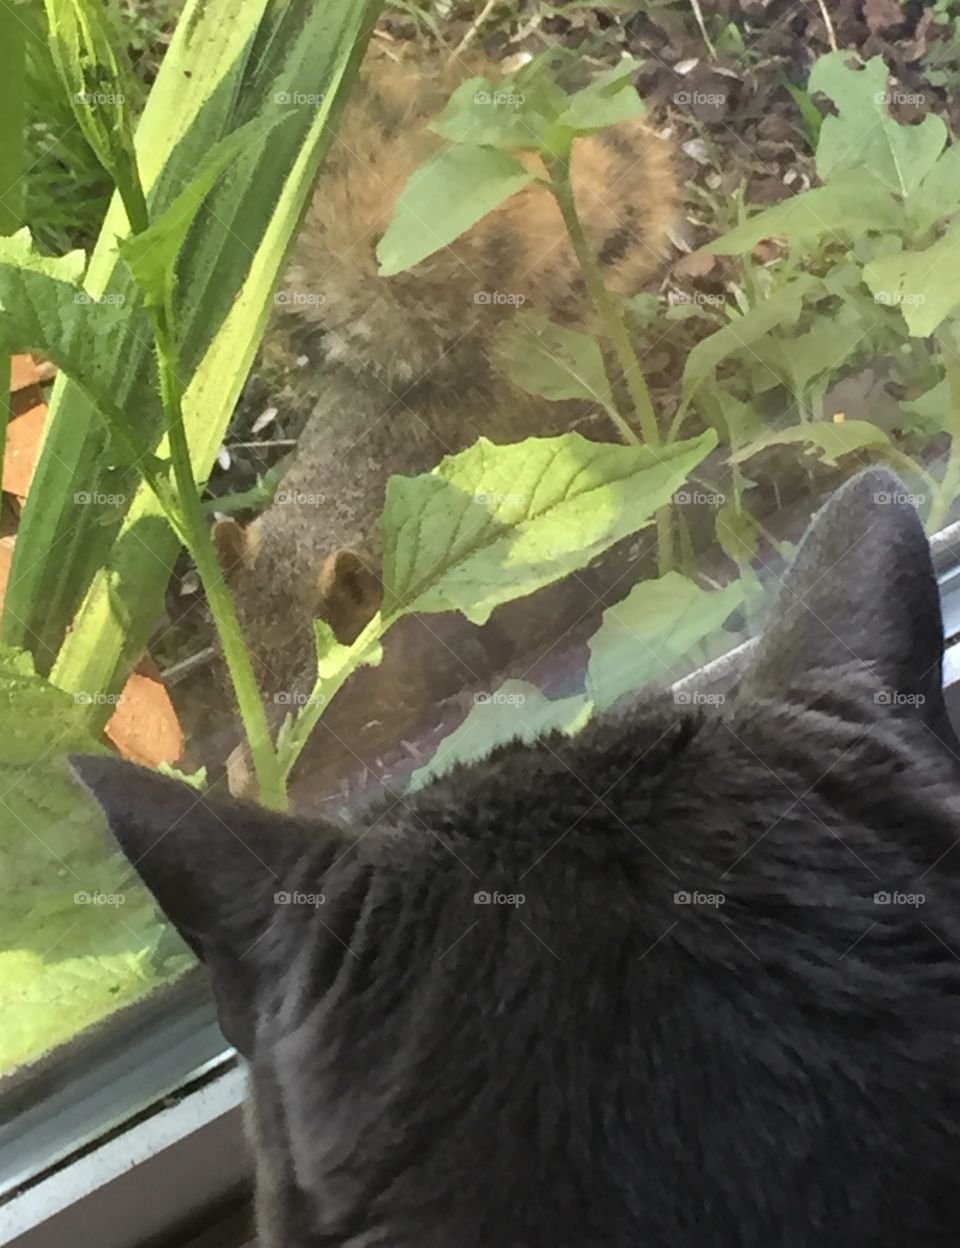 From the view of Gemma the cat at the squirrel feeding. 